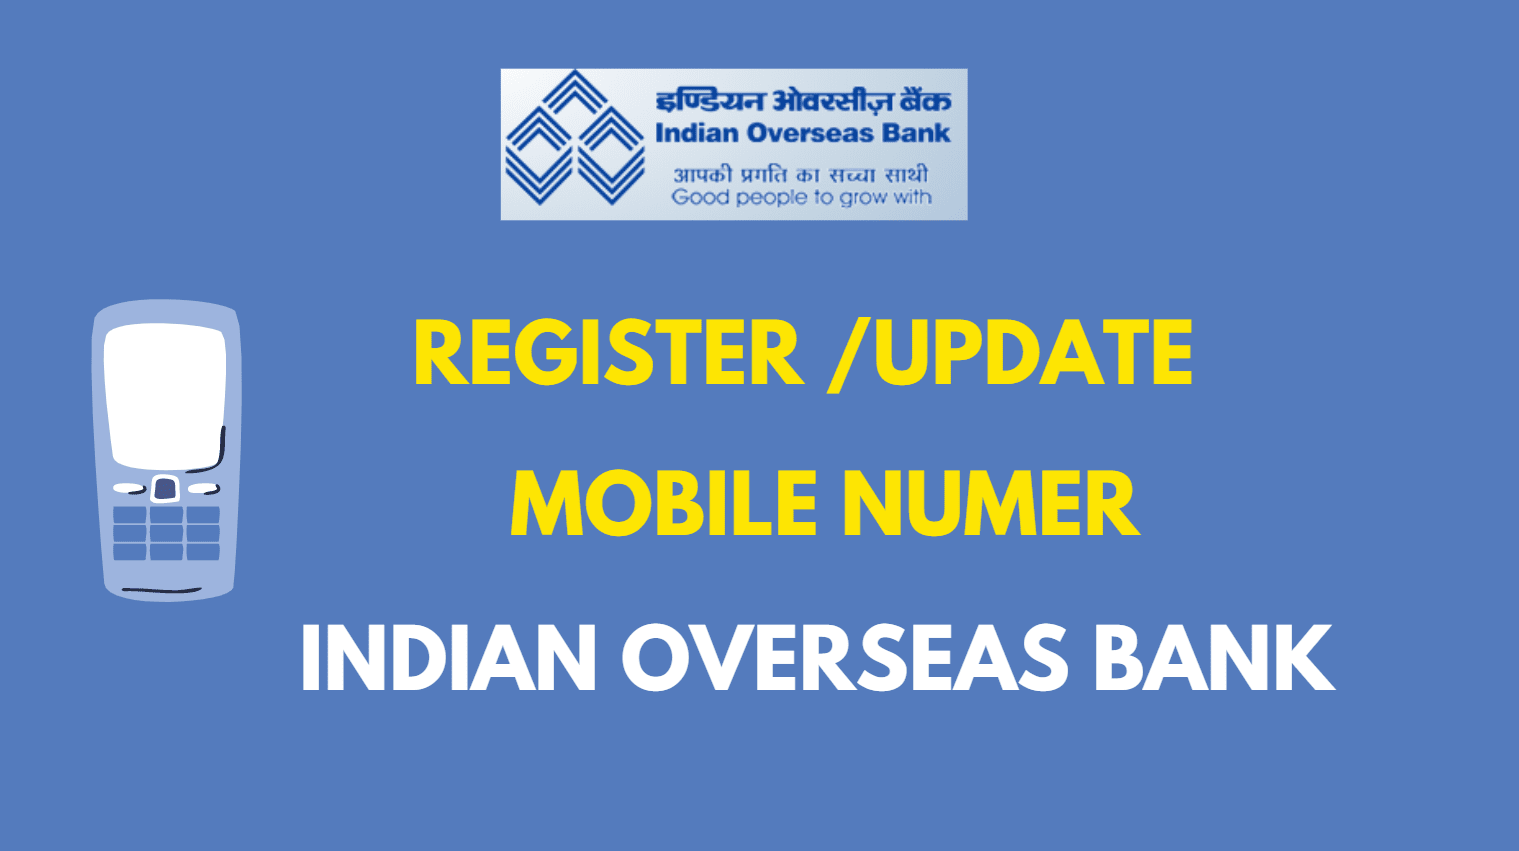 steps to Register or Update Mobile number in Indian Overseas Bank